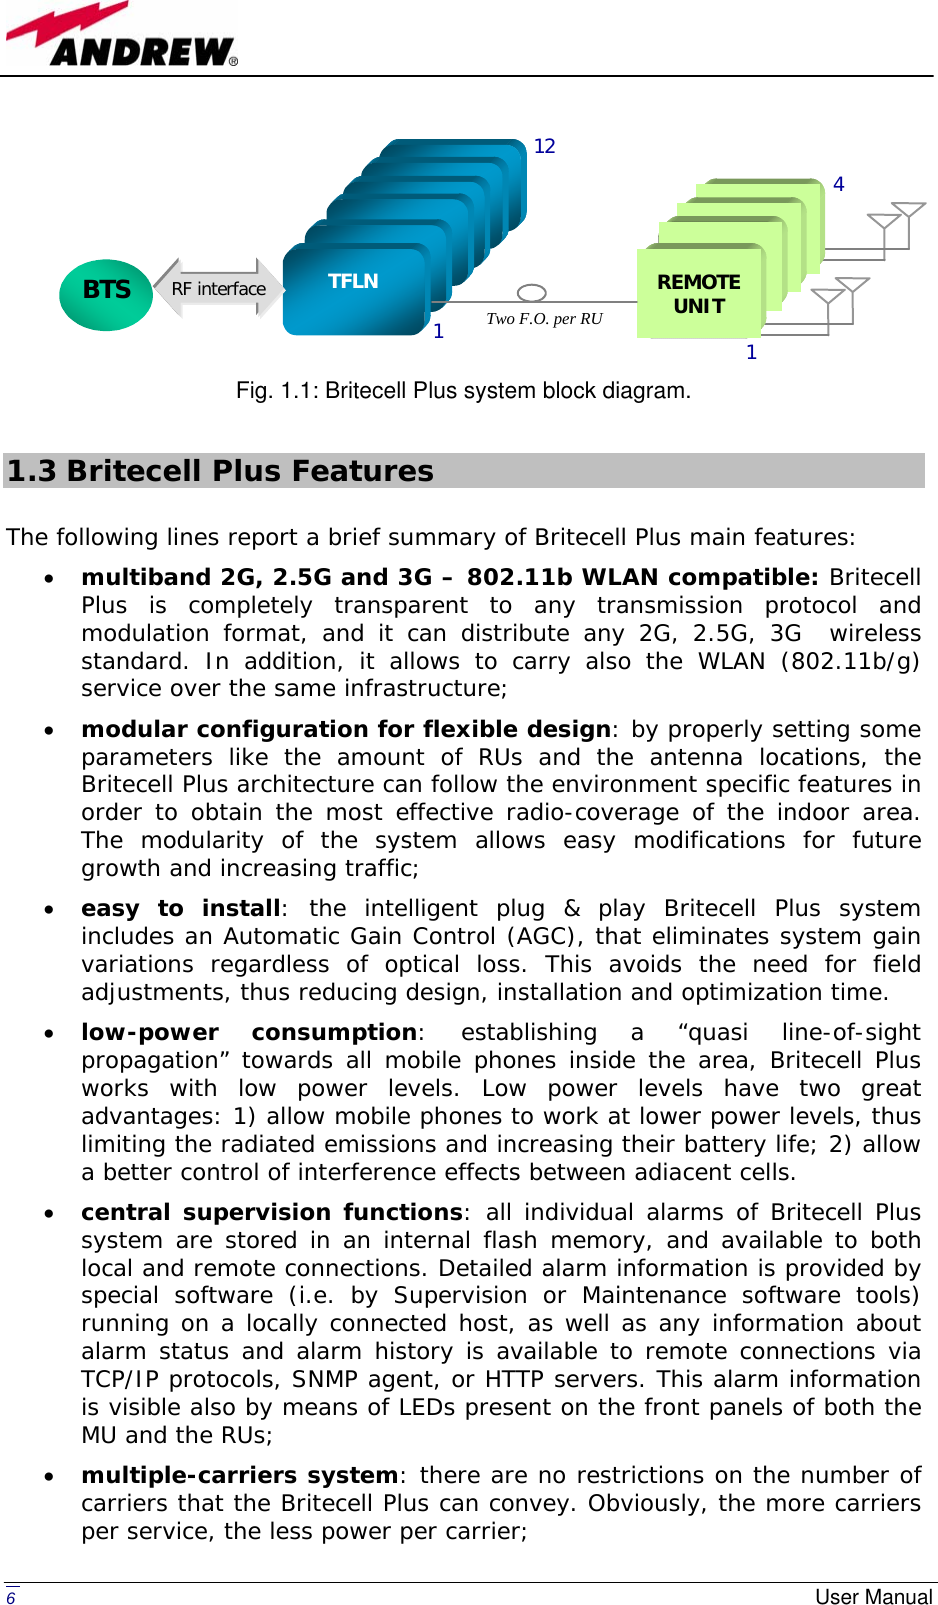   6  User Manual          Fig. 1.1: Britecell Plus system block diagram.  1.3 Britecell Plus Features  The following lines report a brief summary of Britecell Plus main features: • multiband 2G, 2.5G and 3G – 802.11b WLAN compatible: Britecell Plus is completely transparent to any transmission protocol and modulation format, and it can distribute any 2G, 2.5G, 3G  wireless standard. In addition, it allows to carry also the WLAN (802.11b/g) service over the same infrastructure;  • modular configuration for flexible design: by properly setting some parameters like the amount of RUs and the antenna locations, the Britecell Plus architecture can follow the environment specific features in order to obtain the most effective radio-coverage of the indoor area. The modularity of the system allows easy modifications for future growth and increasing traffic; • easy to install: the intelligent plug &amp; play Britecell Plus system includes an Automatic Gain Control (AGC), that eliminates system gain variations regardless of optical loss. This avoids the need for field adjustments, thus reducing design, installation and optimization time. • low-power consumption: establishing a “quasi line-of-sight propagation” towards all mobile phones inside the area, Britecell Plus works with low power levels. Low power levels have two great advantages: 1) allow mobile phones to work at lower power levels, thus limiting the radiated emissions and increasing their battery life; 2) allow a better control of interference effects between adiacent cells. • central supervision functions: all individual alarms of Britecell Plus system are stored in an internal flash memory, and available to both local and remote connections. Detailed alarm information is provided by special software (i.e. by Supervision or Maintenance software tools) running on a locally connected host, as well as any information about alarm status and alarm history is available to remote connections via TCP/IP protocols, SNMP agent, or HTTP servers. This alarm information is visible also by means of LEDs present on the front panels of both the MU and the RUs; • multiple-carriers system: there are no restrictions on the number of carriers that the Britecell Plus can convey. Obviously, the more carriers per service, the less power per carrier;  BTS      TFLN 1 12    REMOTE UNIT 1  4  RF interfaceTwo F.O. per RU 